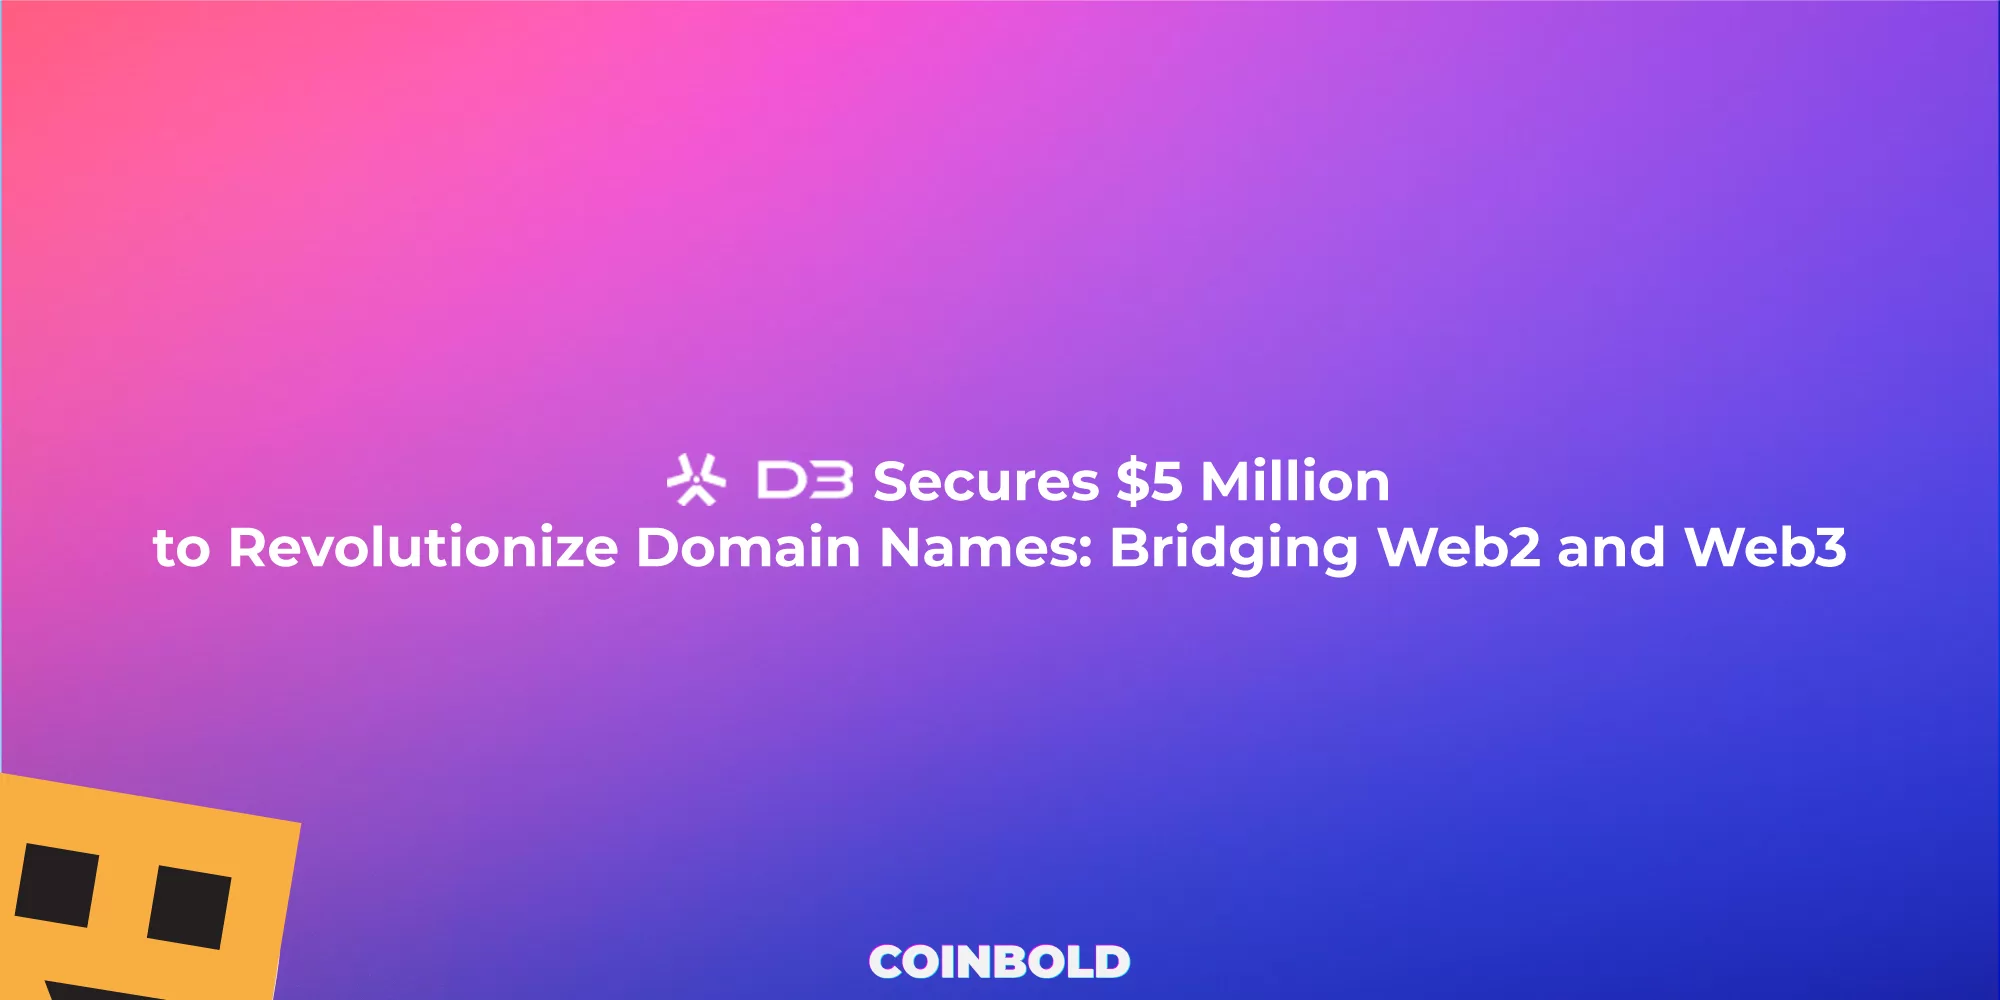 D3 Global Secures $5 Million to Revolutionize Domain Names Bridging Web2 and Web3